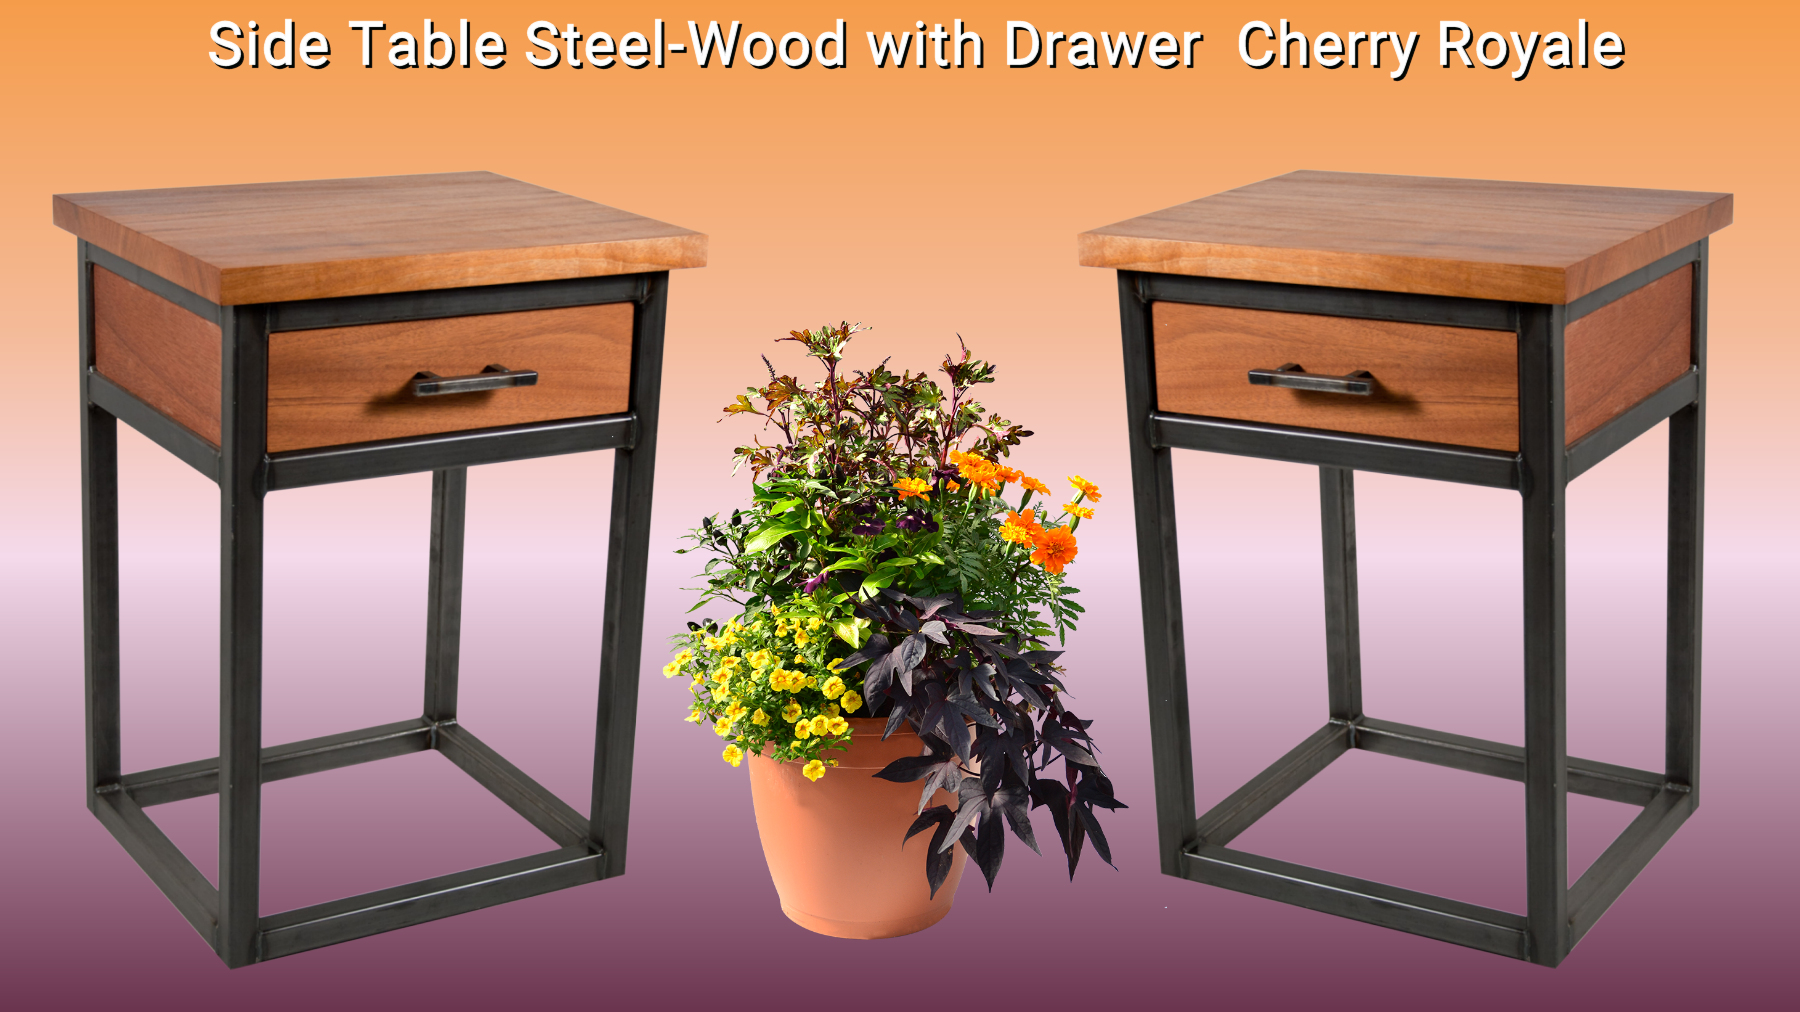 Side Table Steel-Wood with Drawer Cherry Royale